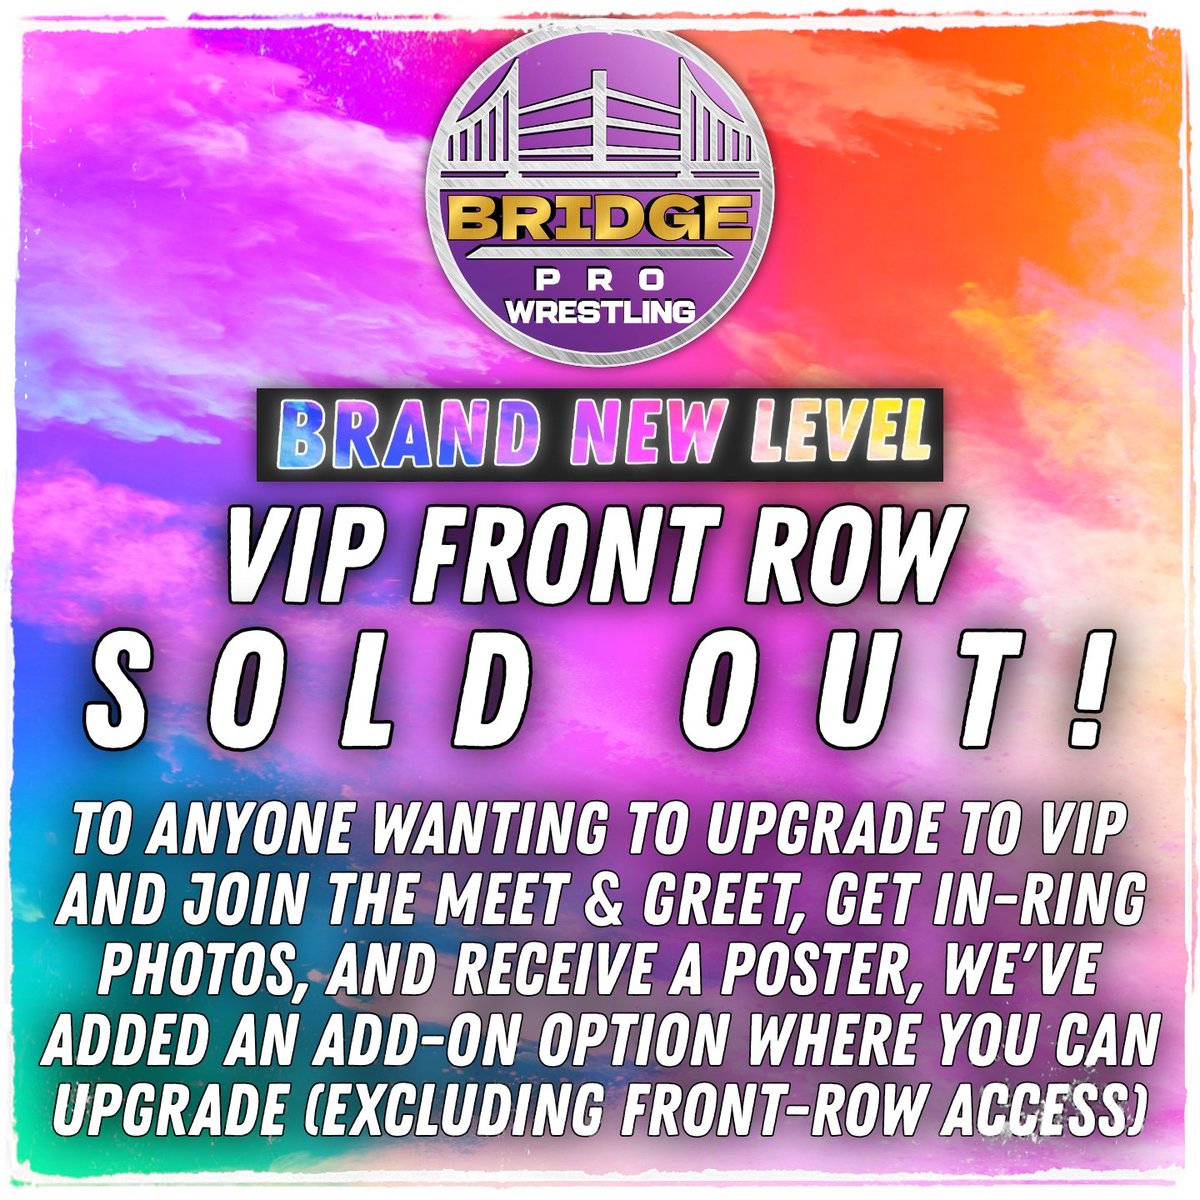 ⚠️ VIP FRONT ROW SOLD OUT ⚠️ HERE'S HOW TO STILL GET VIP BENEFITS 🔥🔥🔥🔥 Head on over to our Eventbrite and UPGRADE your ticket 🎟️ eventbrite.co.uk/e/bridge-pro-w… We are down to just a HANDFUL of tickets until we are completely SOLD OUT of all tix 👊🏻 DON'T MISS OUT.